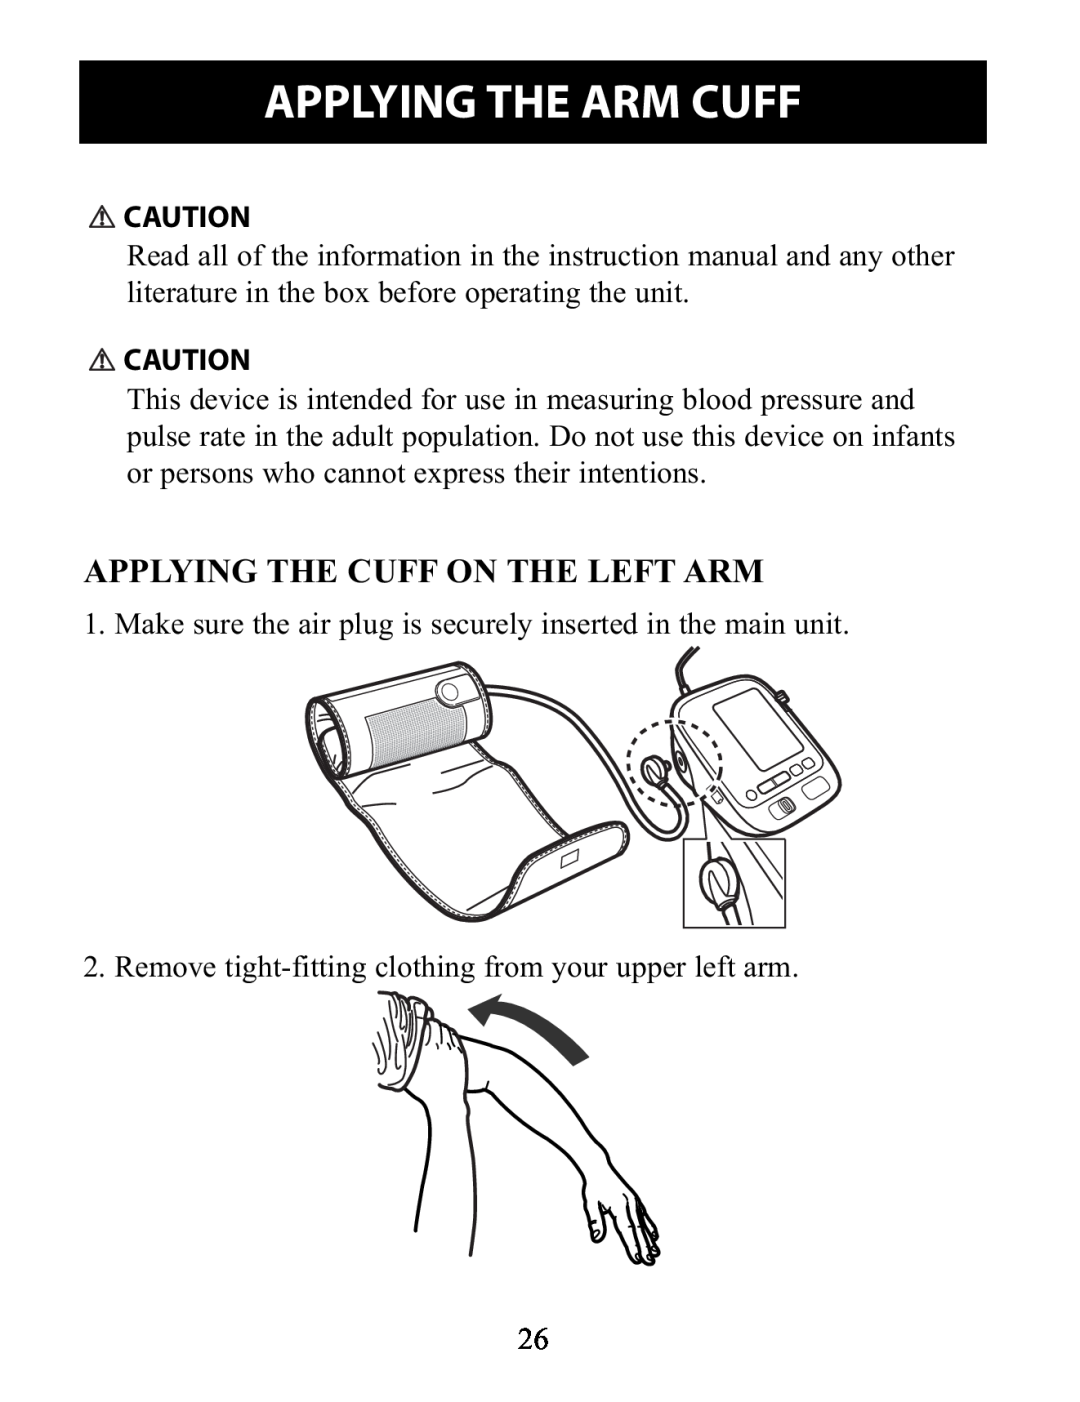 Omron Healthcare BP791IT instruction manual Applying The Arm Cuff, Applying The Cuff On The Left Arm 